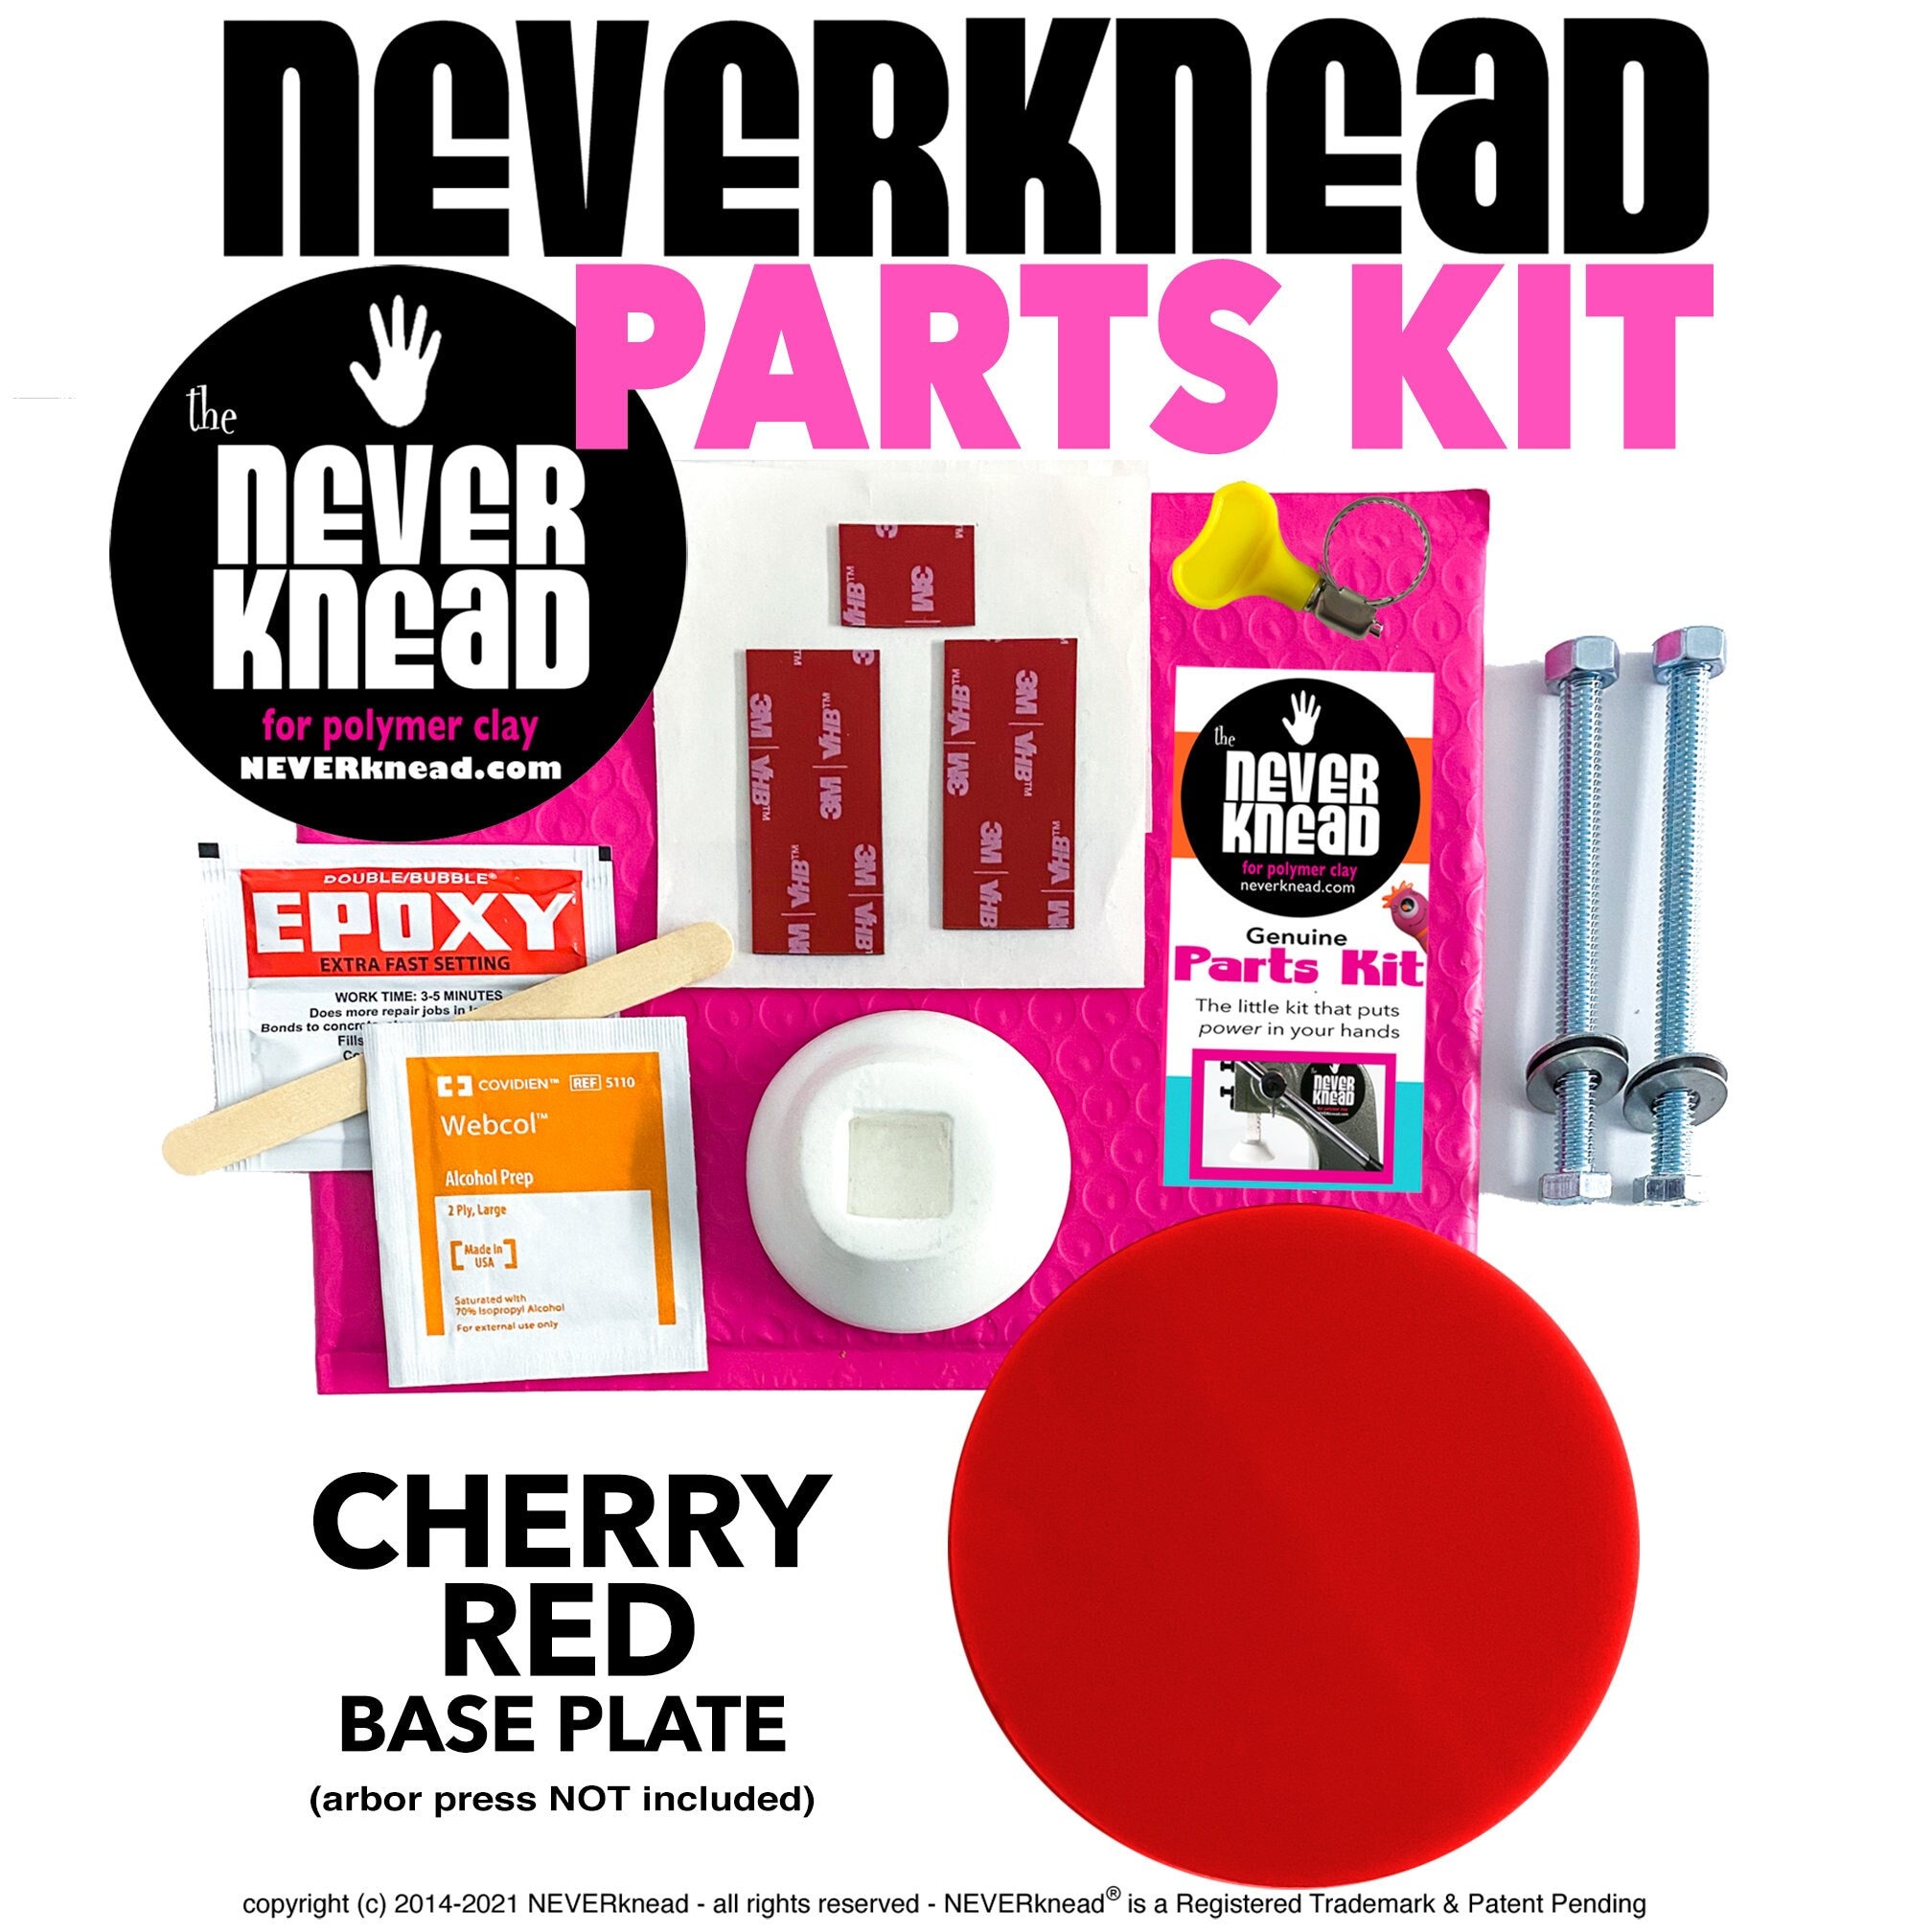 STOP the Hurt Knead Clay the Easy Way With Neverknead DIY